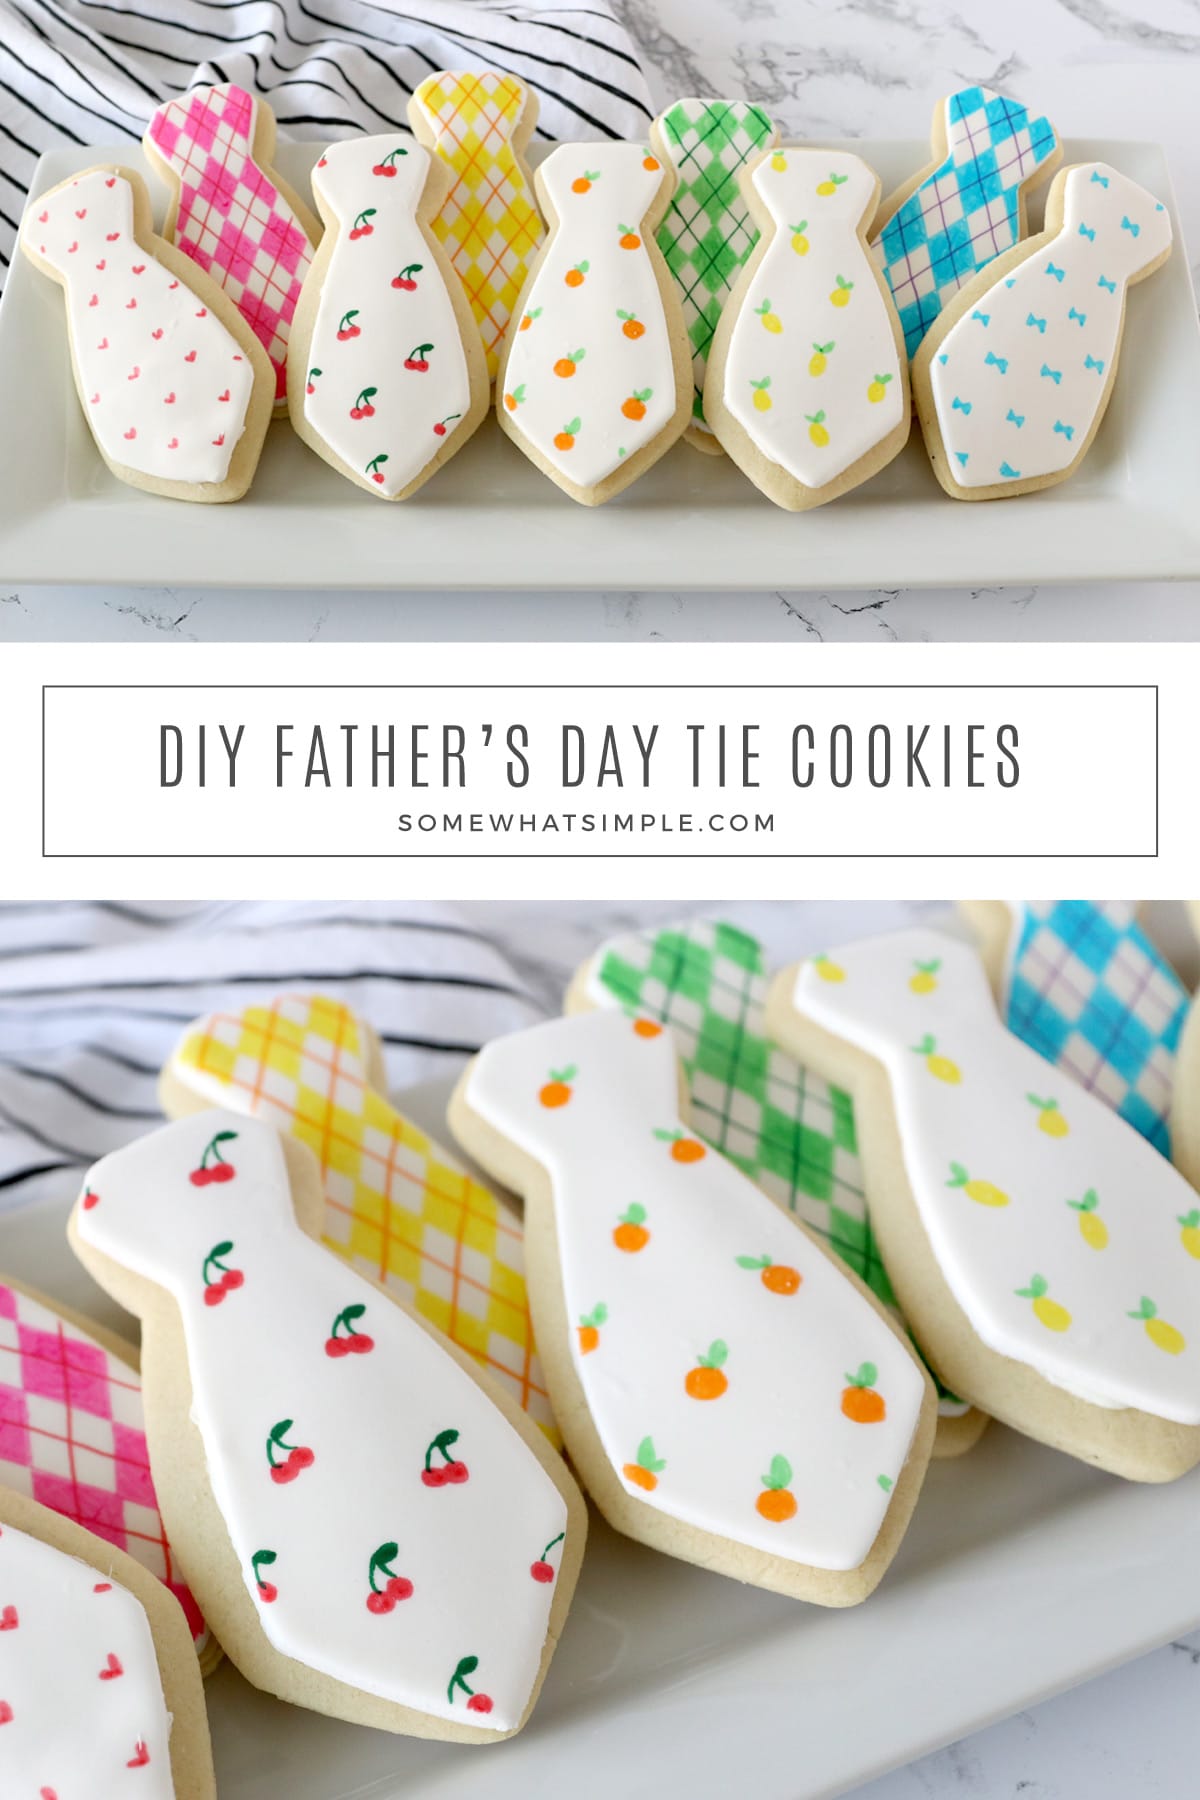 You can't go wrong with an edible tie for Dad! Here is how to make EASY Father's Day Tie Cookies that taste great and look darling. via @somewhatsimple